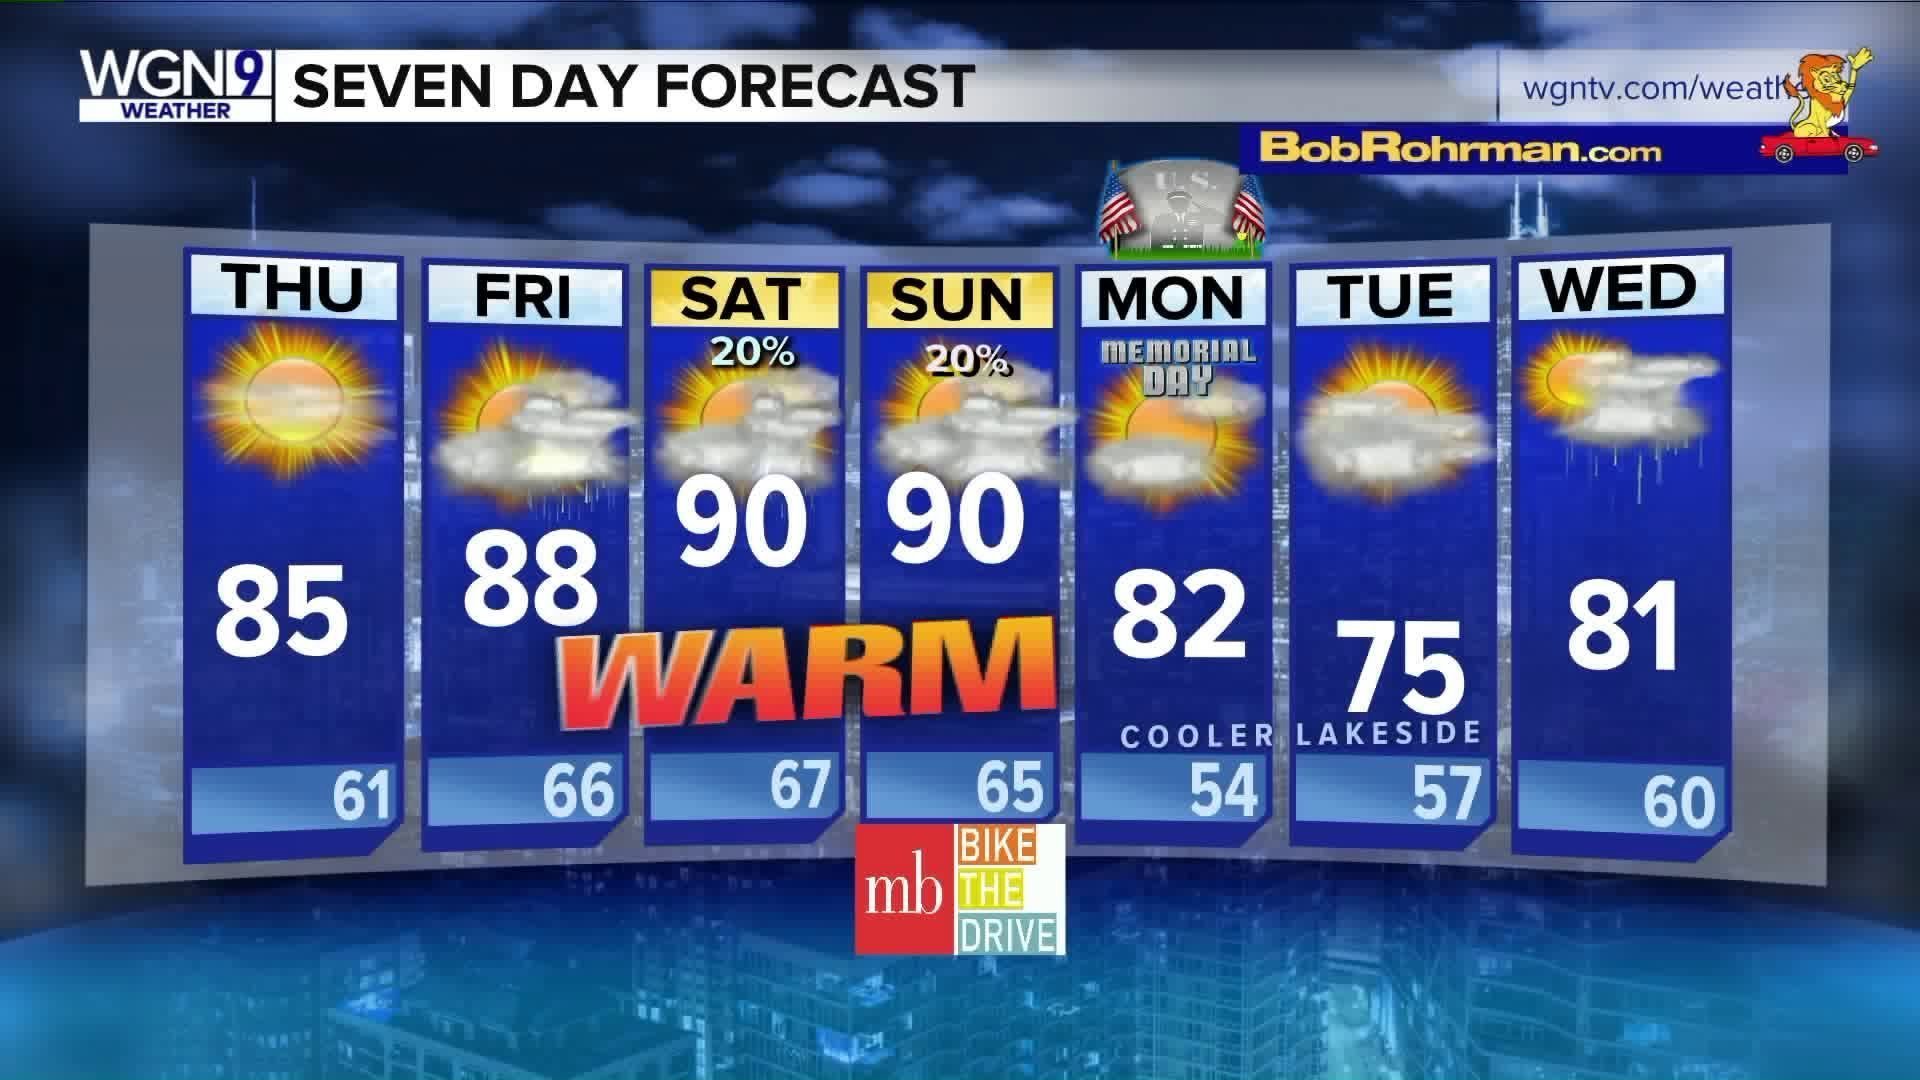 7-day-forecast: Weekend will be downright hot - Chicago Tribune